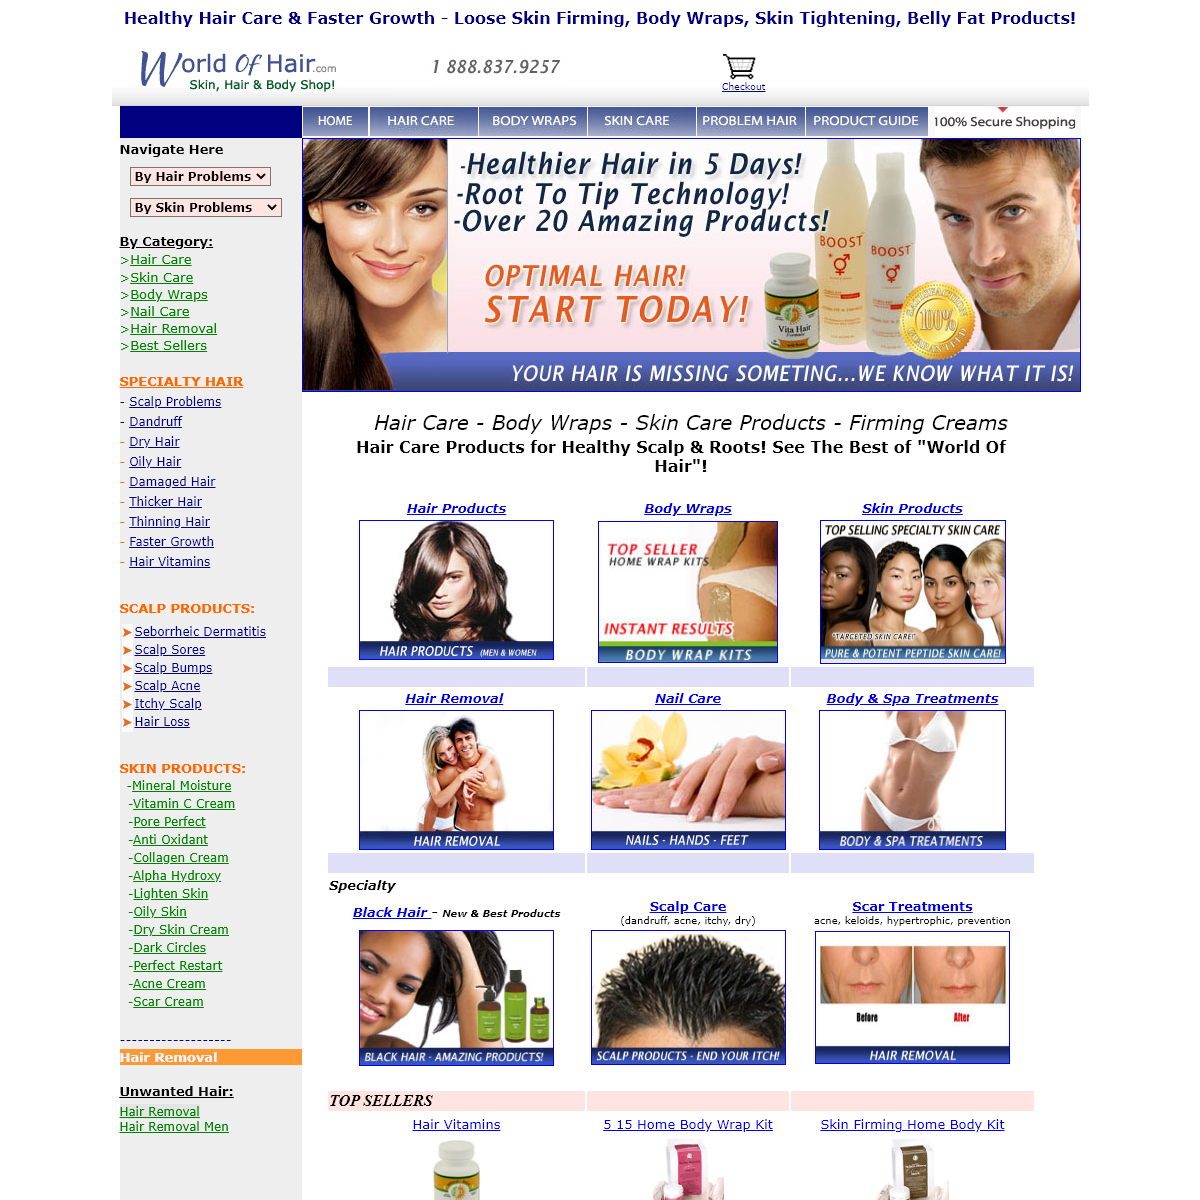 A complete backup of worldofhair.com